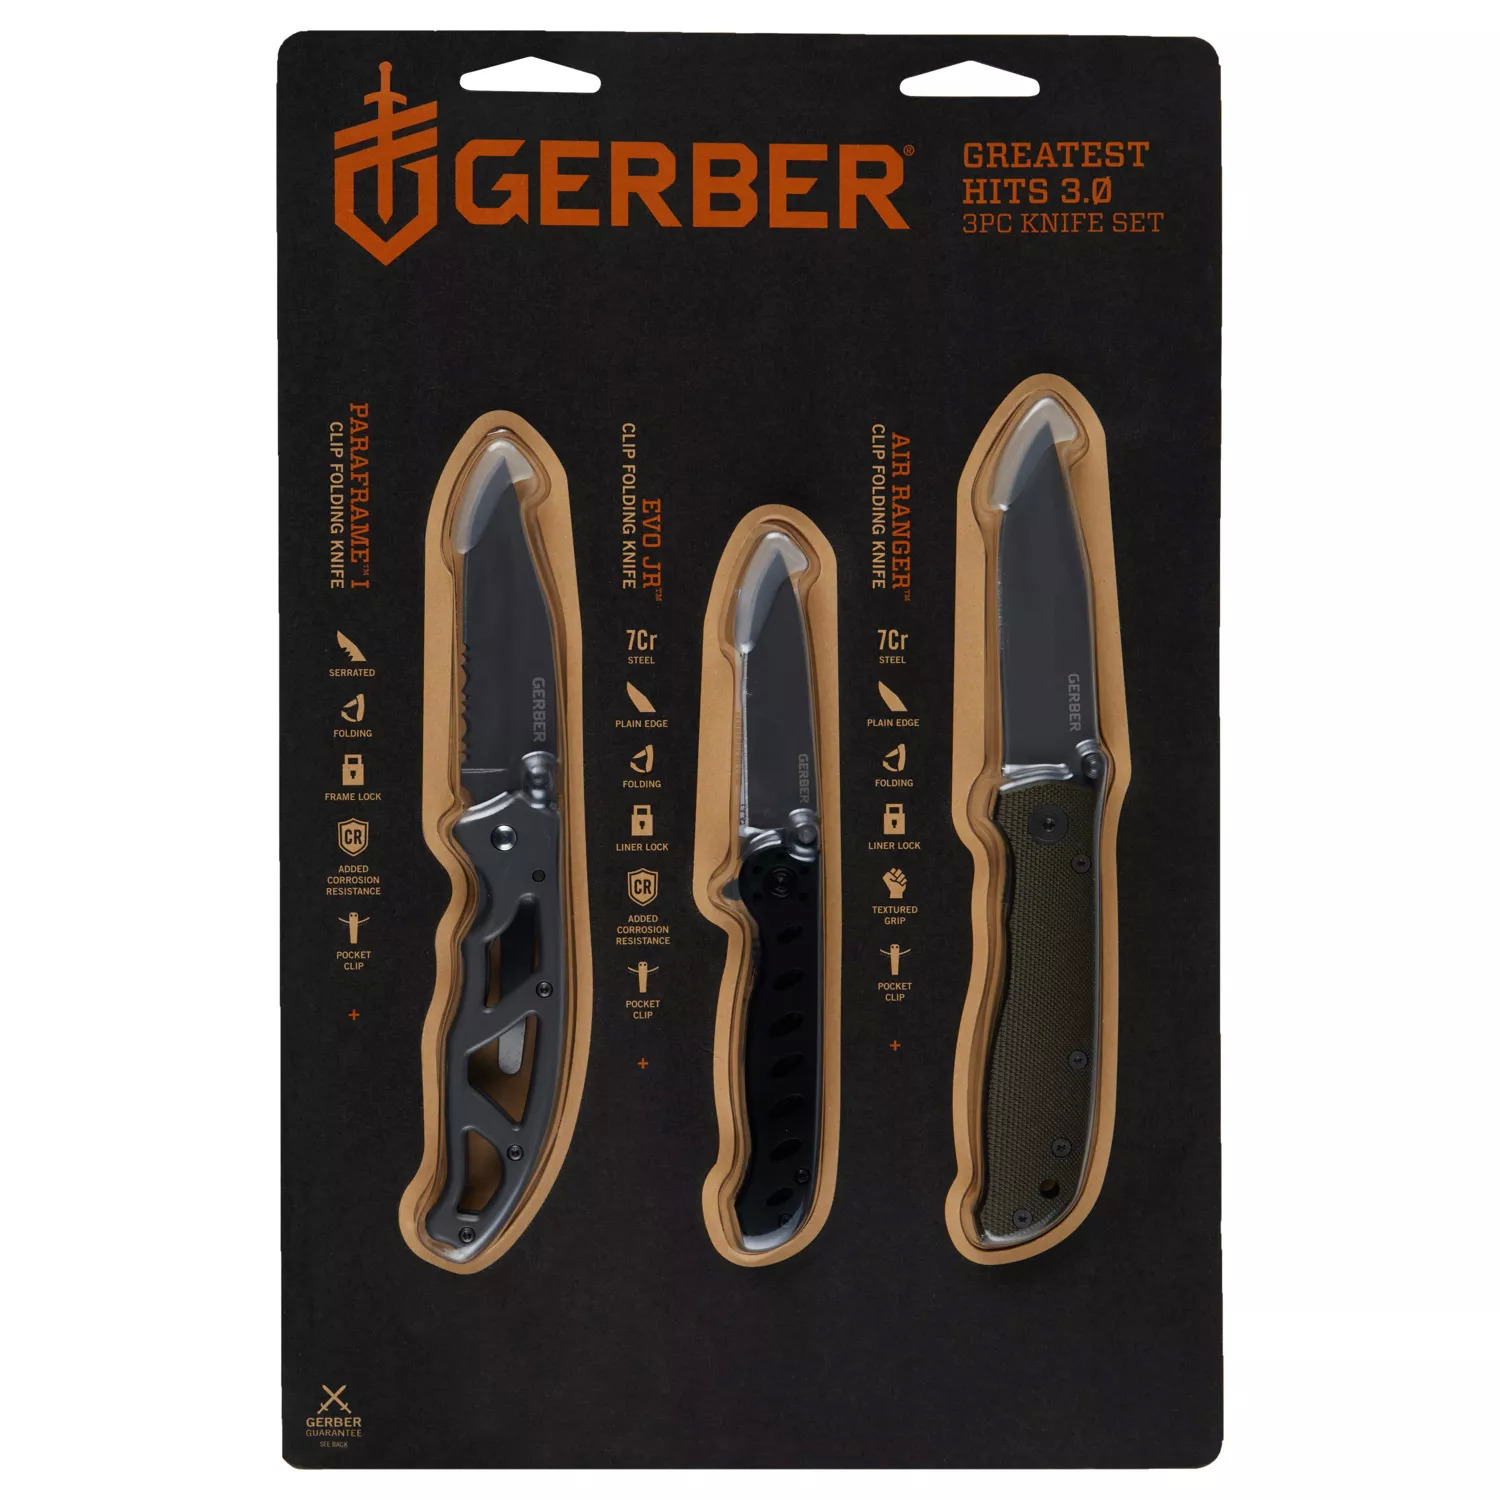 Gerber Gear Greatest Hits 3-Piece Folding Knife Set $7.58 @ Sam’s Club Price Varies by Store